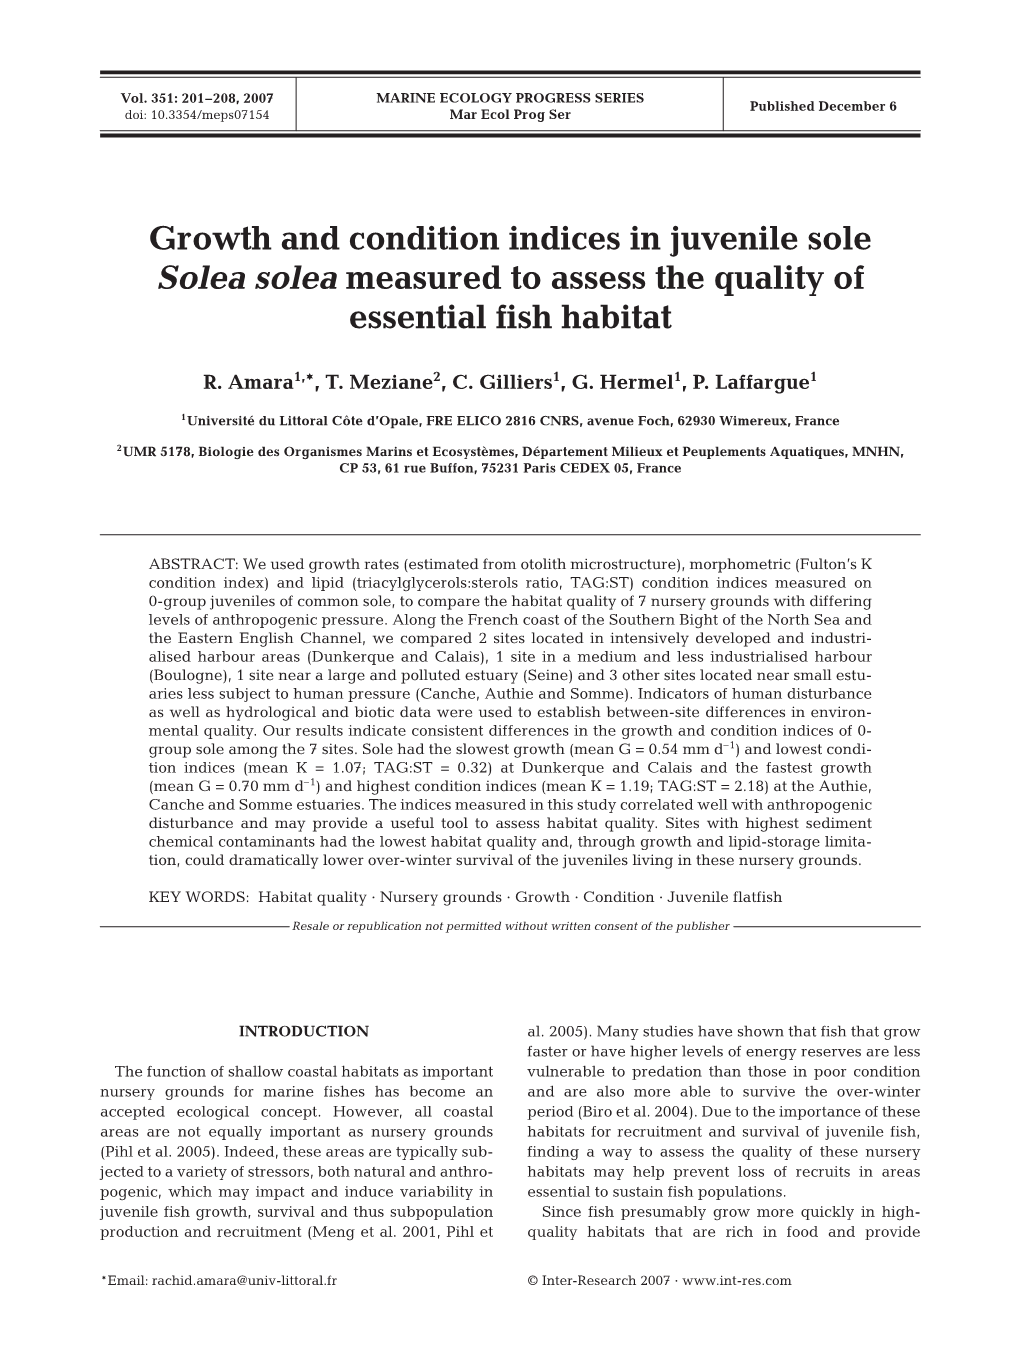 Growth and Condition Indices in Juvenile Sole Solea Solea Measured to Assess the Quality of Essential Fish Habitat